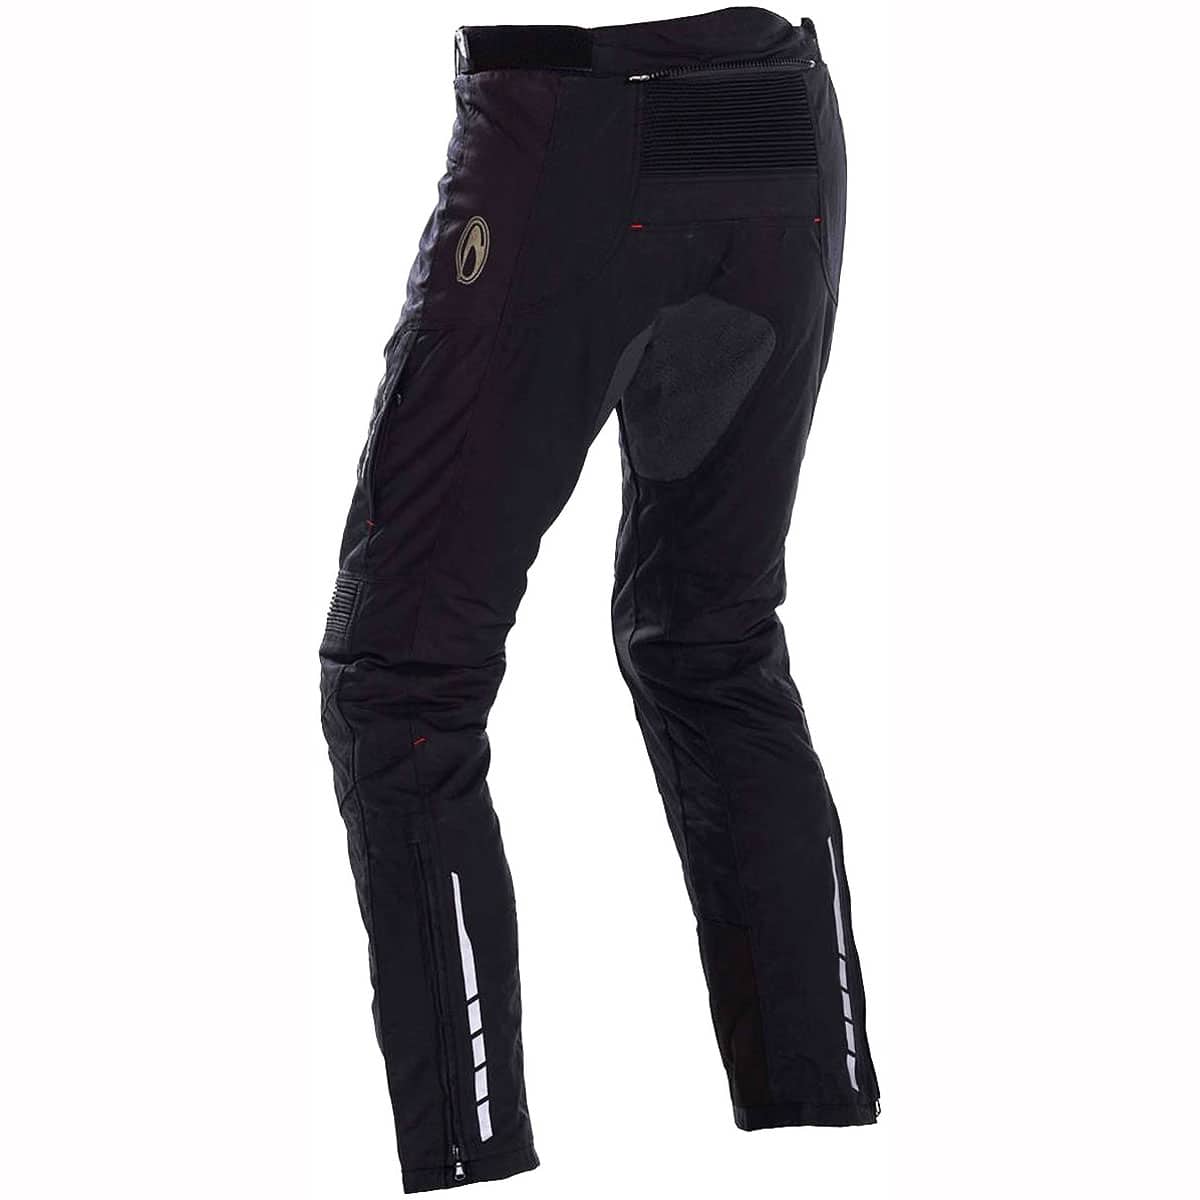 The <b>Richa Colorado waterproof motorcycle trousers</b> offer durable value without excessive cost - Seat